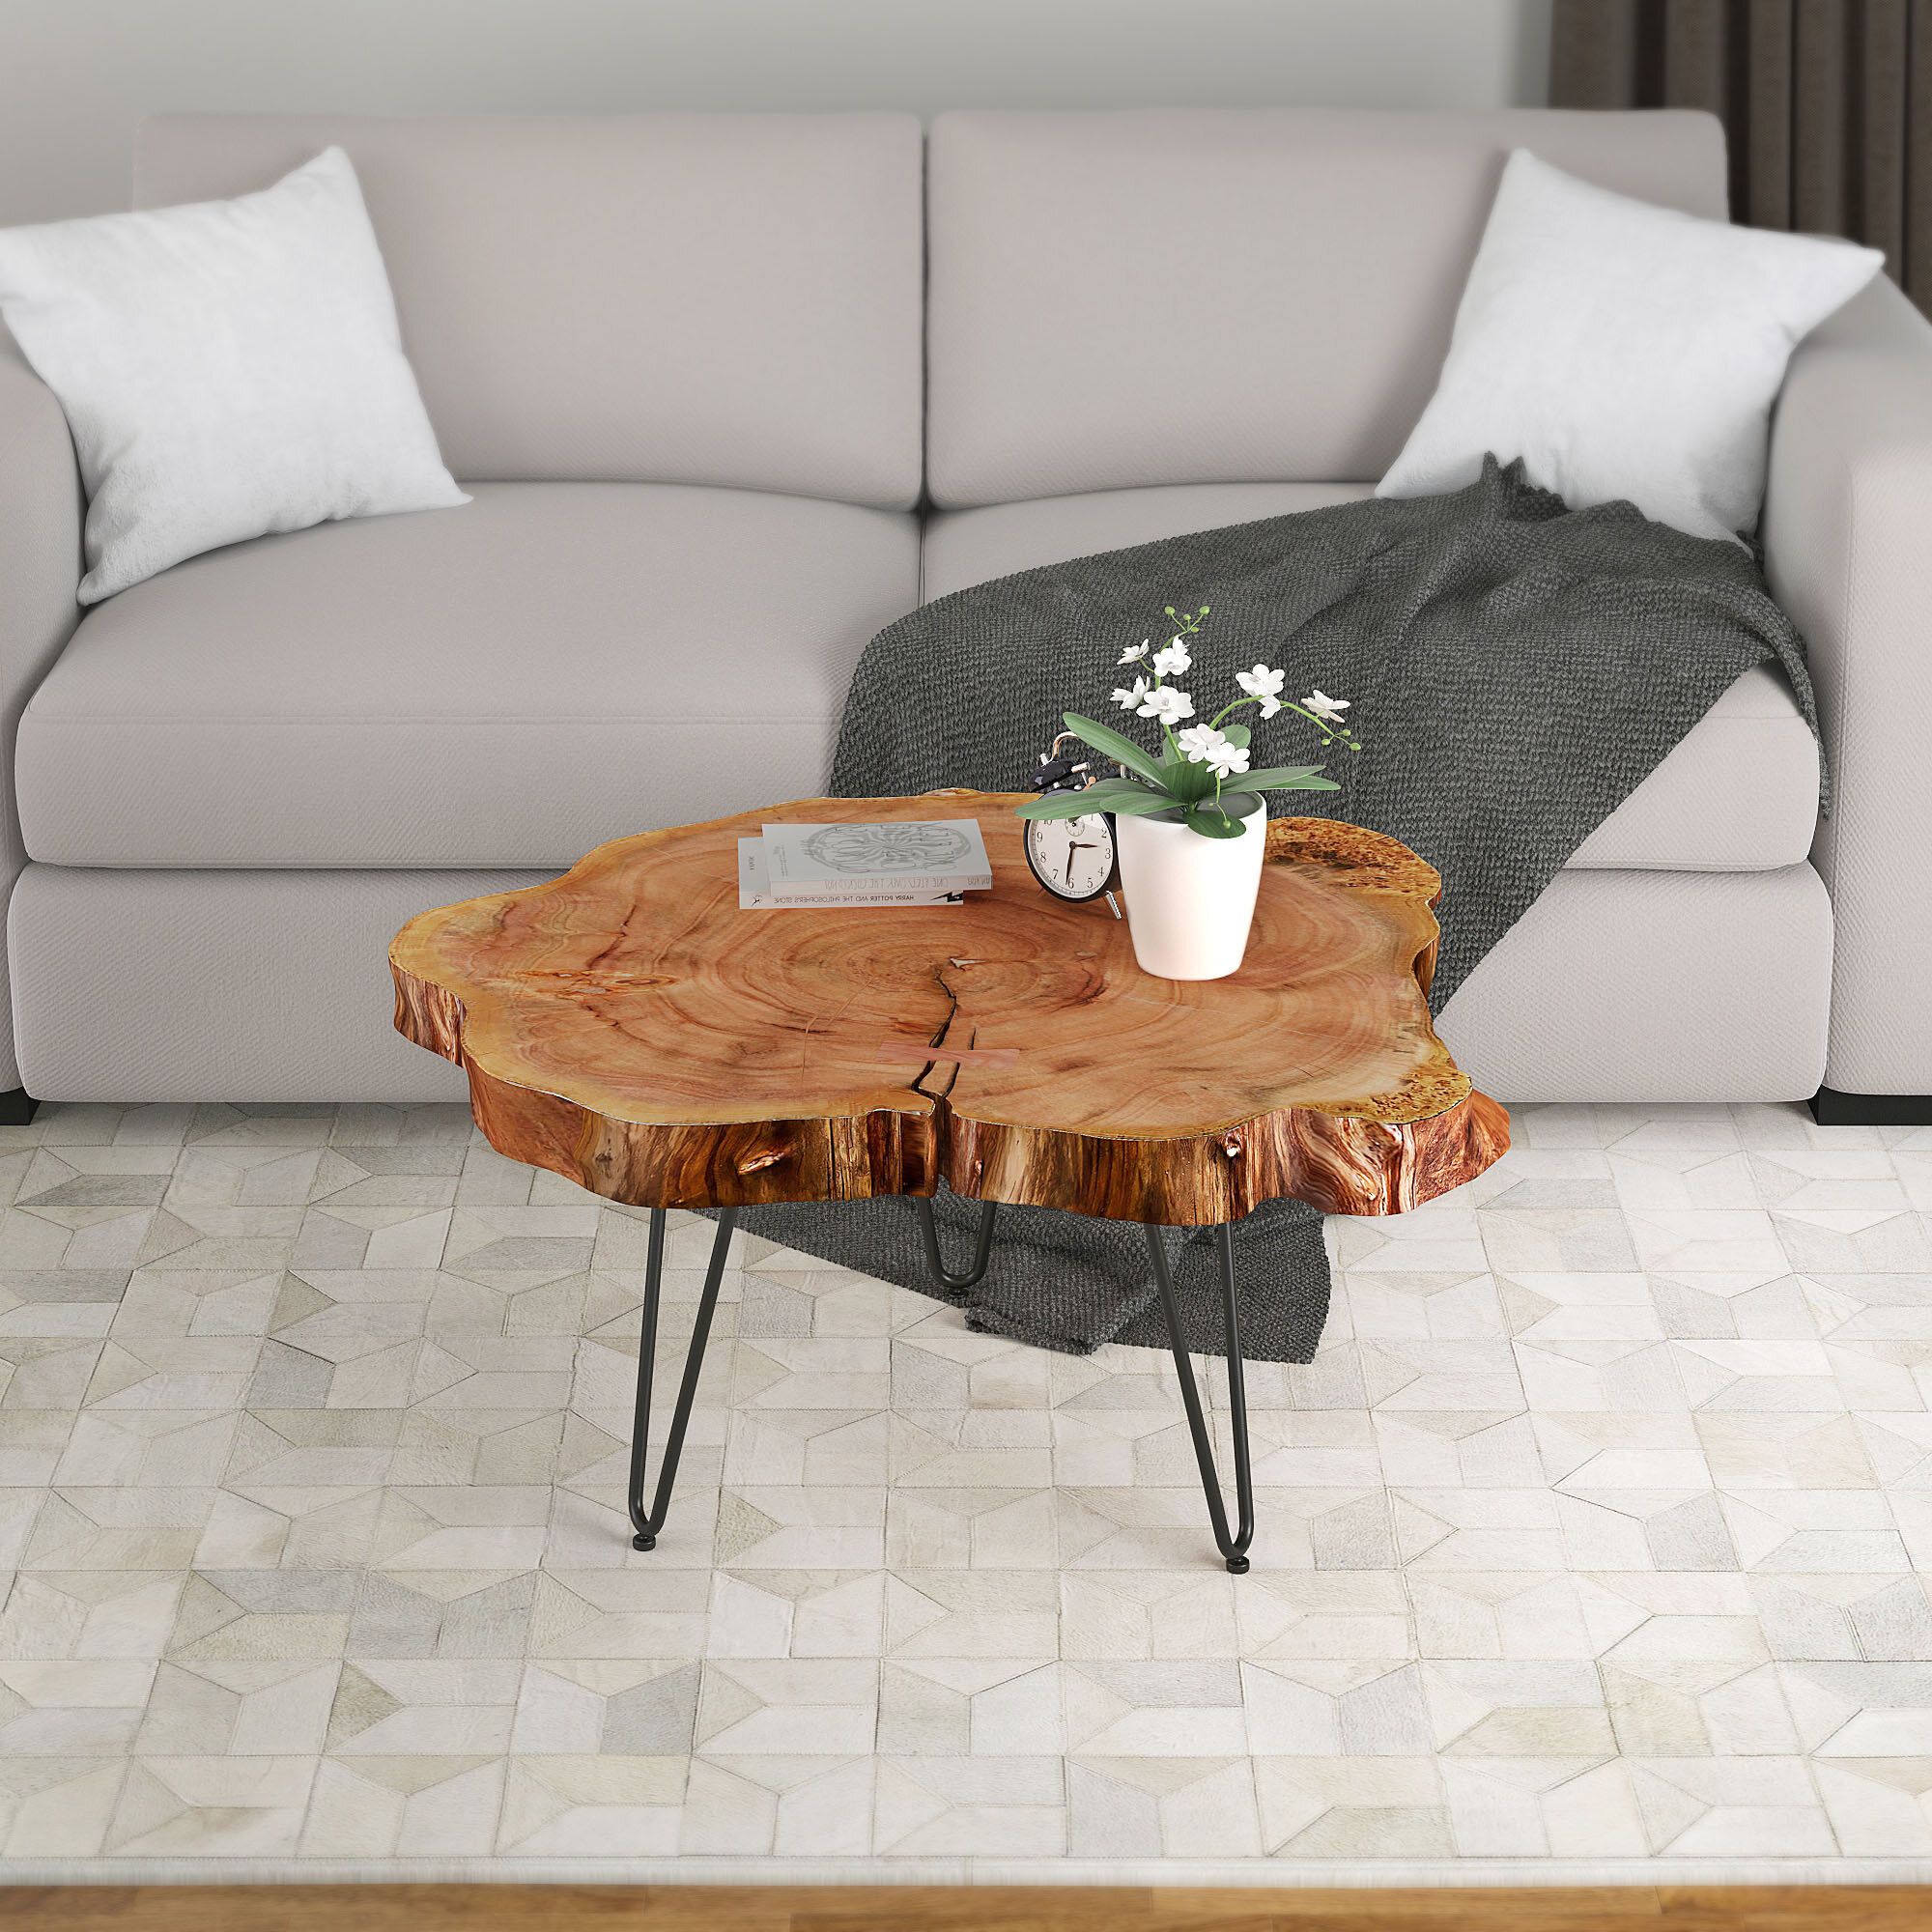 Wrought Studio Etchison Acacia Wood Coffee Table & Reviews | Wayfair With Regard To Acacia Wood Coffee Tables (View 13 of 15)